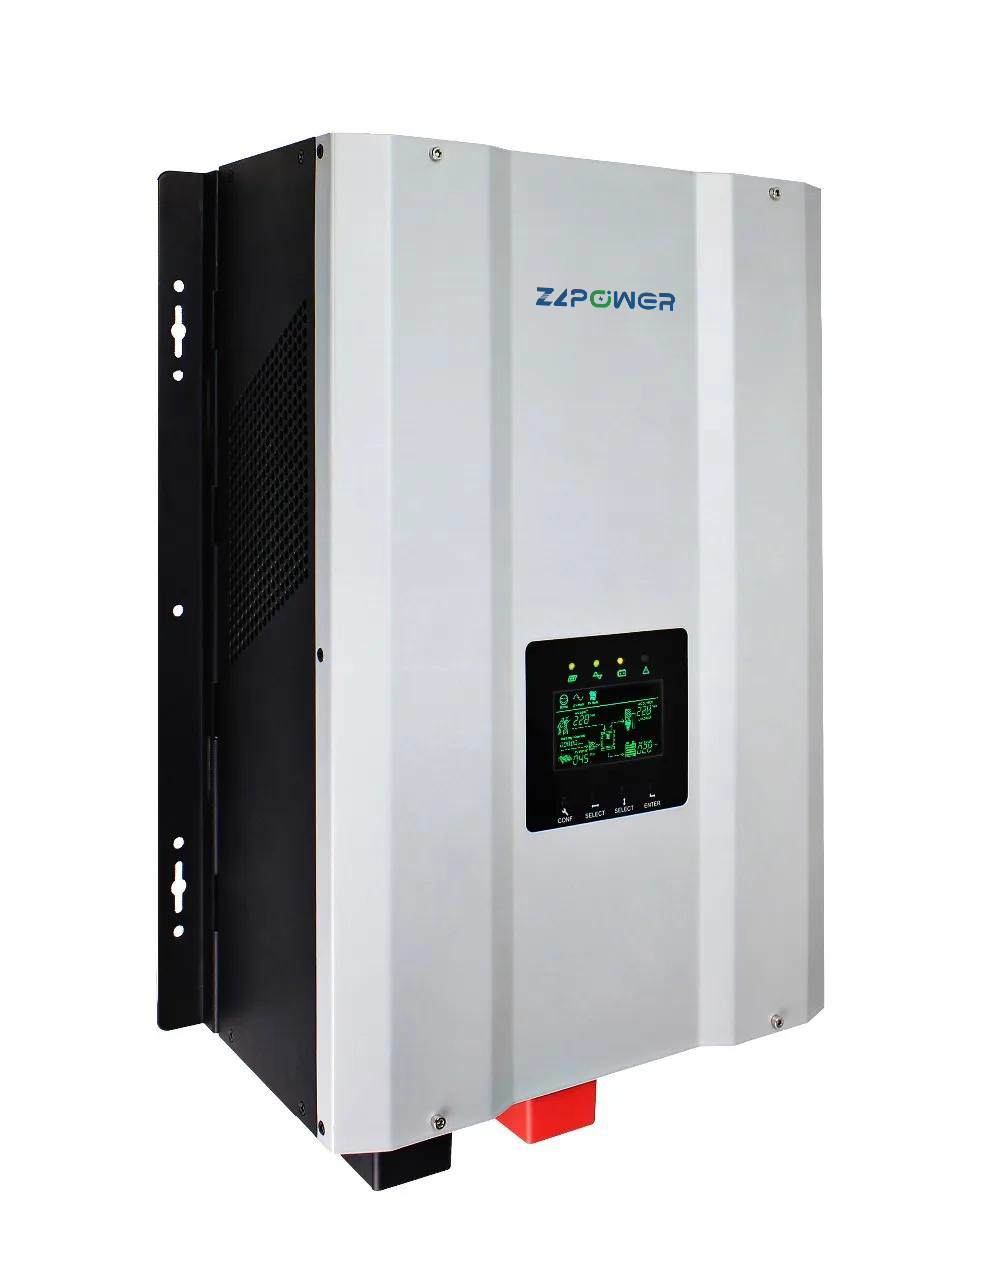 Can a 48v Low Frequency Inverter from China Provide a Reliable and Stable Solution to Your Power Needs